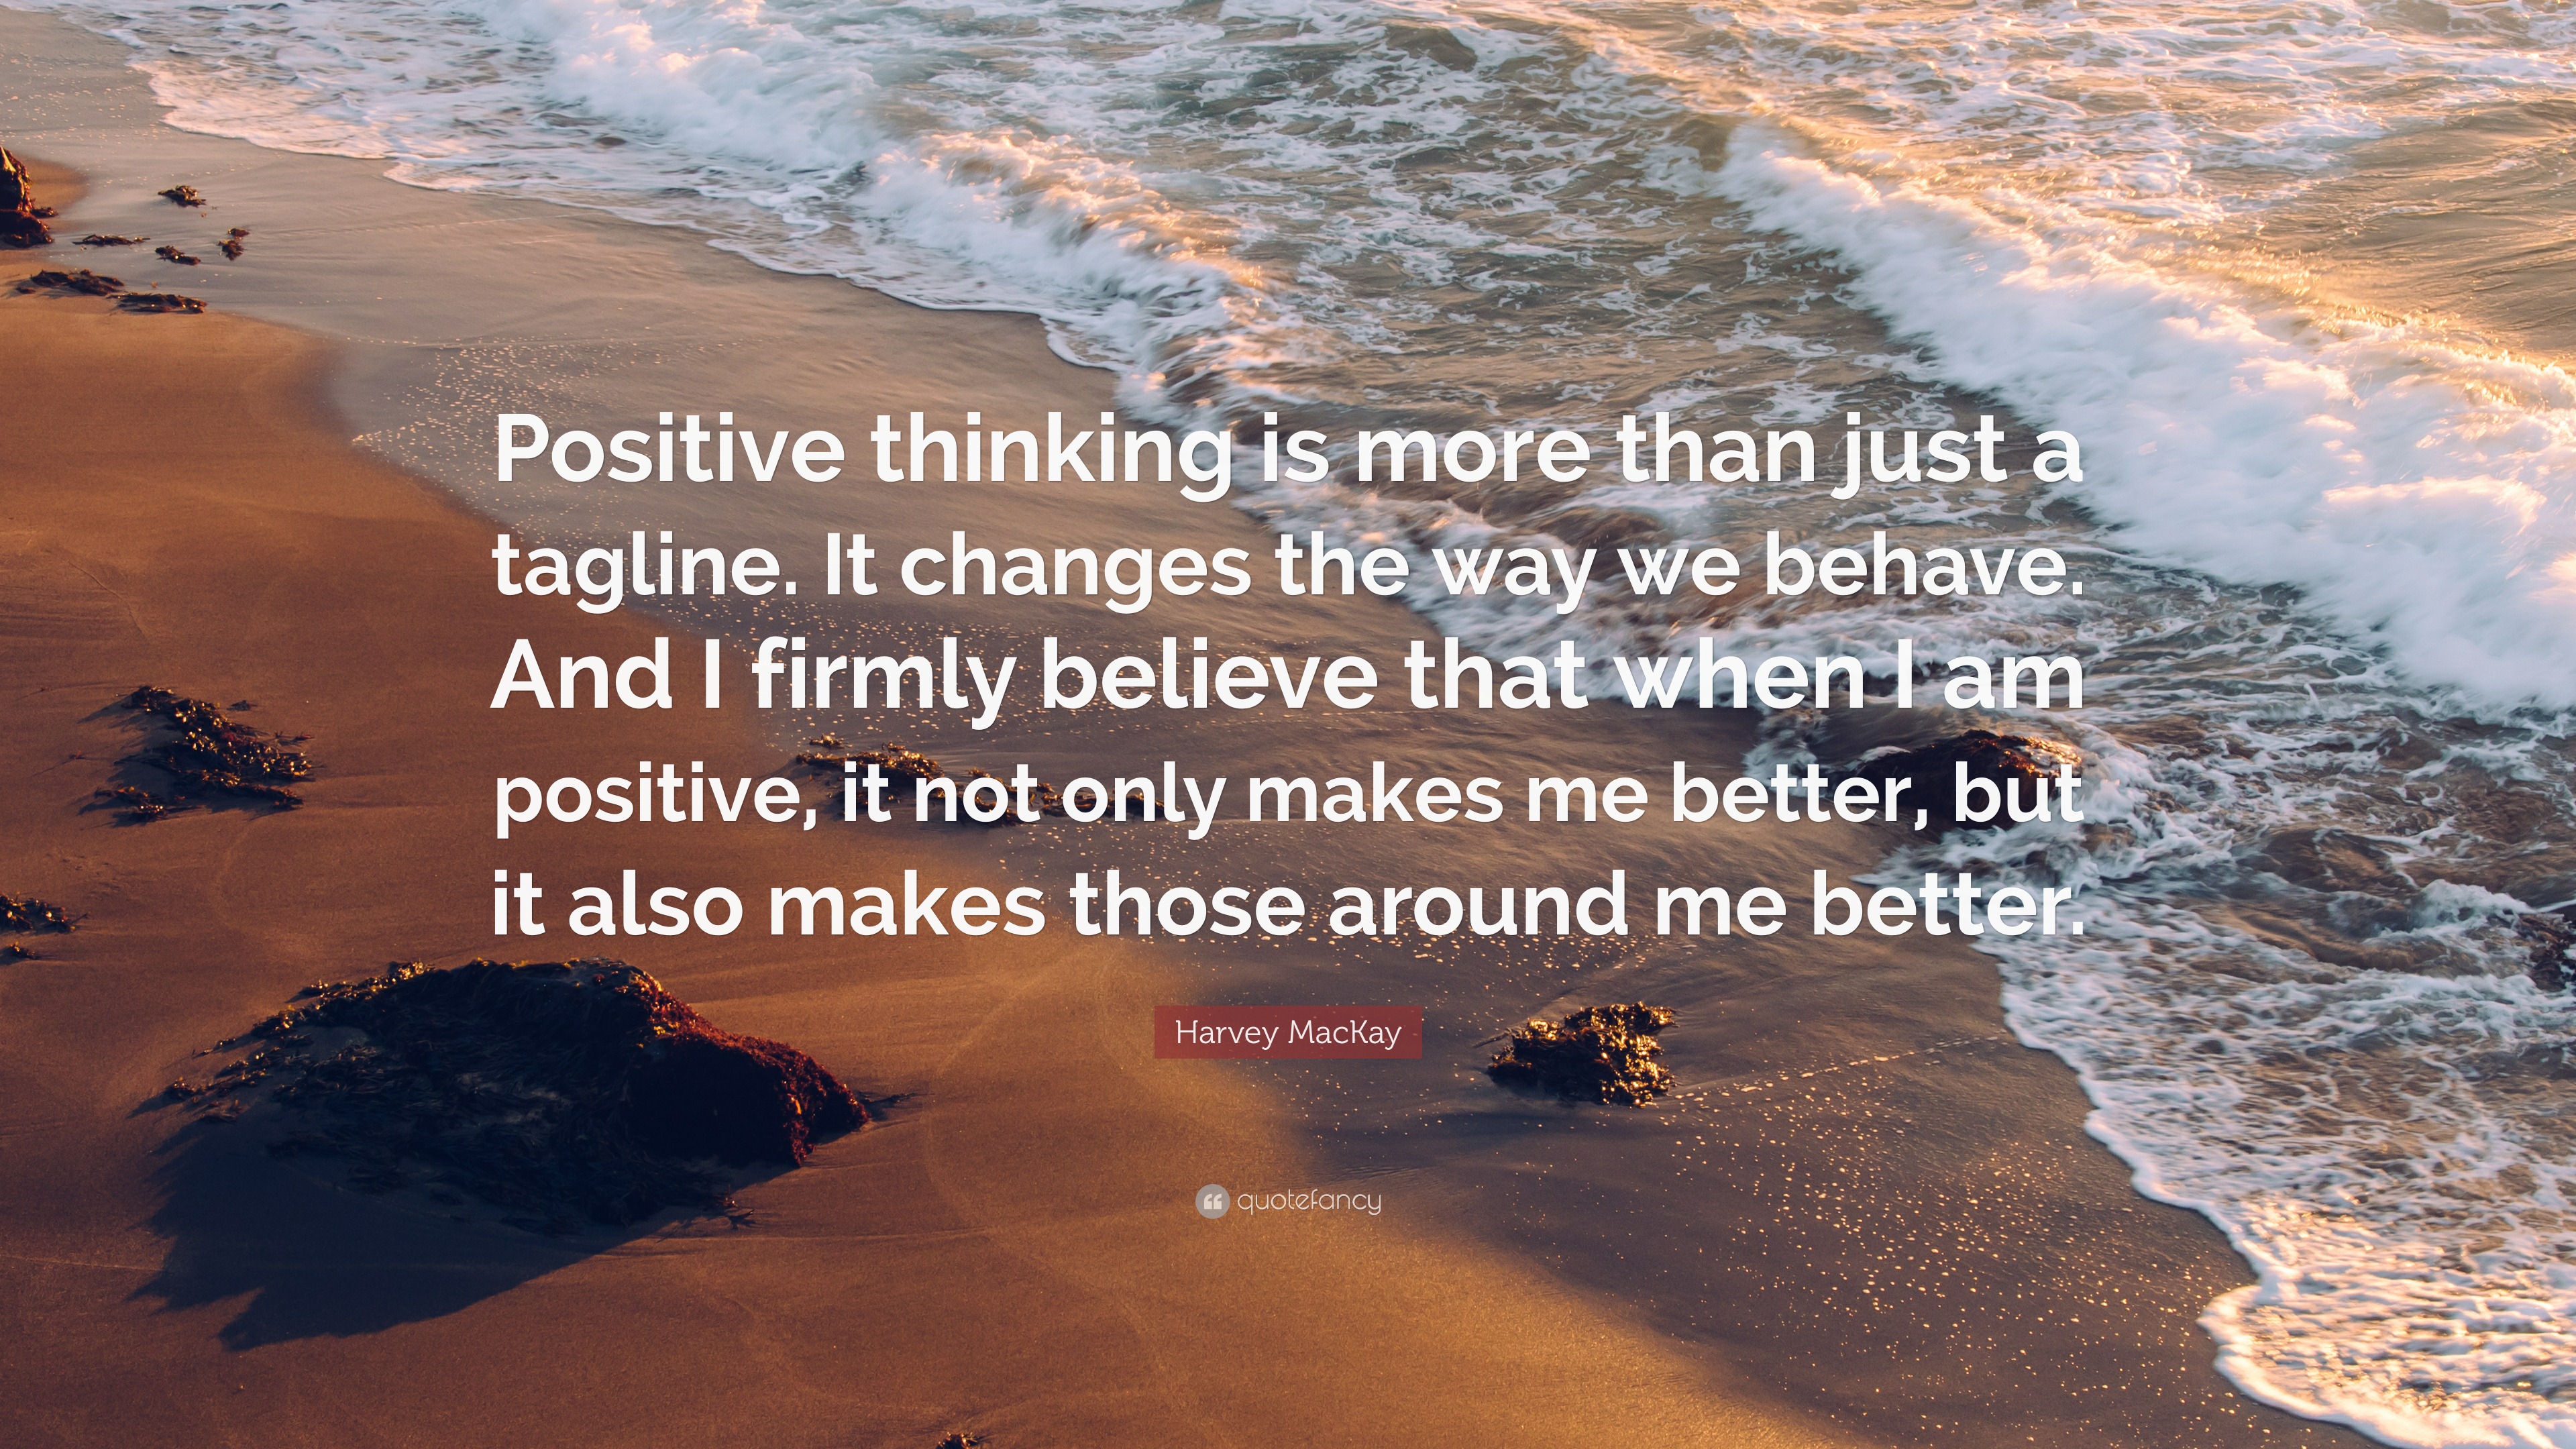 Harvey MacKay Quote “Positive thinking is more than just a tagline. It